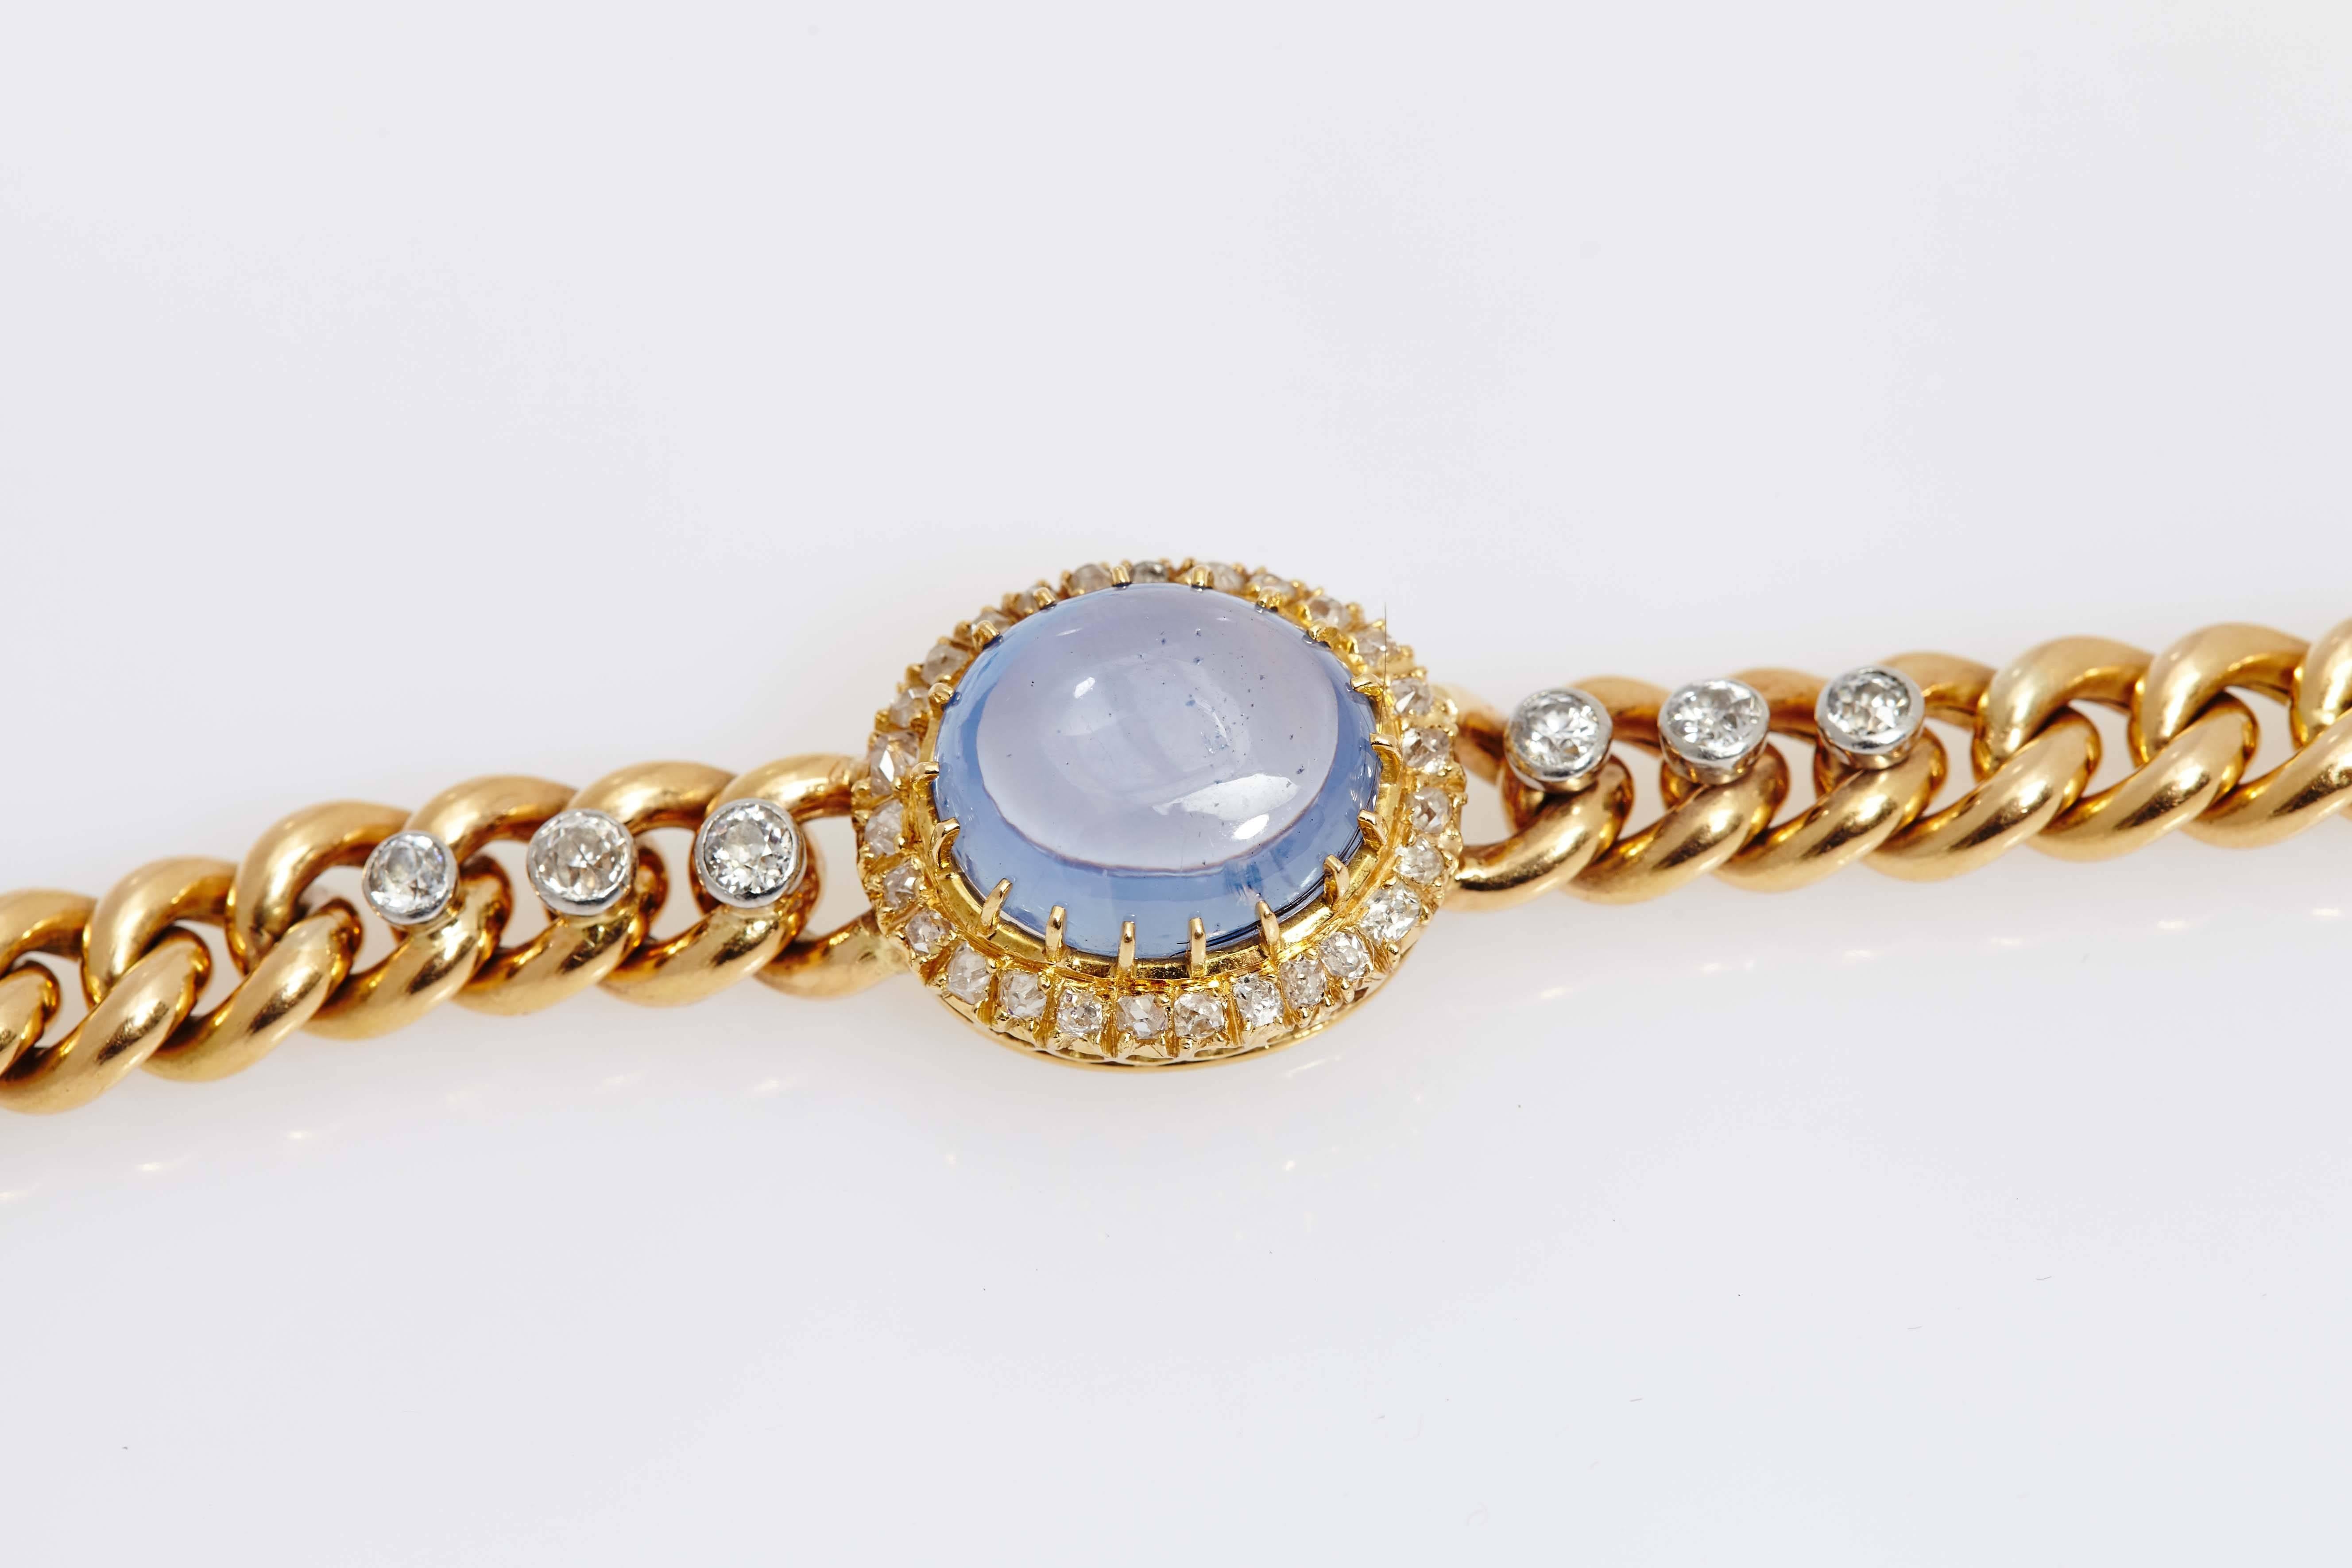 An antique 18kt yellow gold link bracelet, showcasing a 15ct Ceylon cabochon sapphire (no heat), highlighted with diamonds. Circa 1890